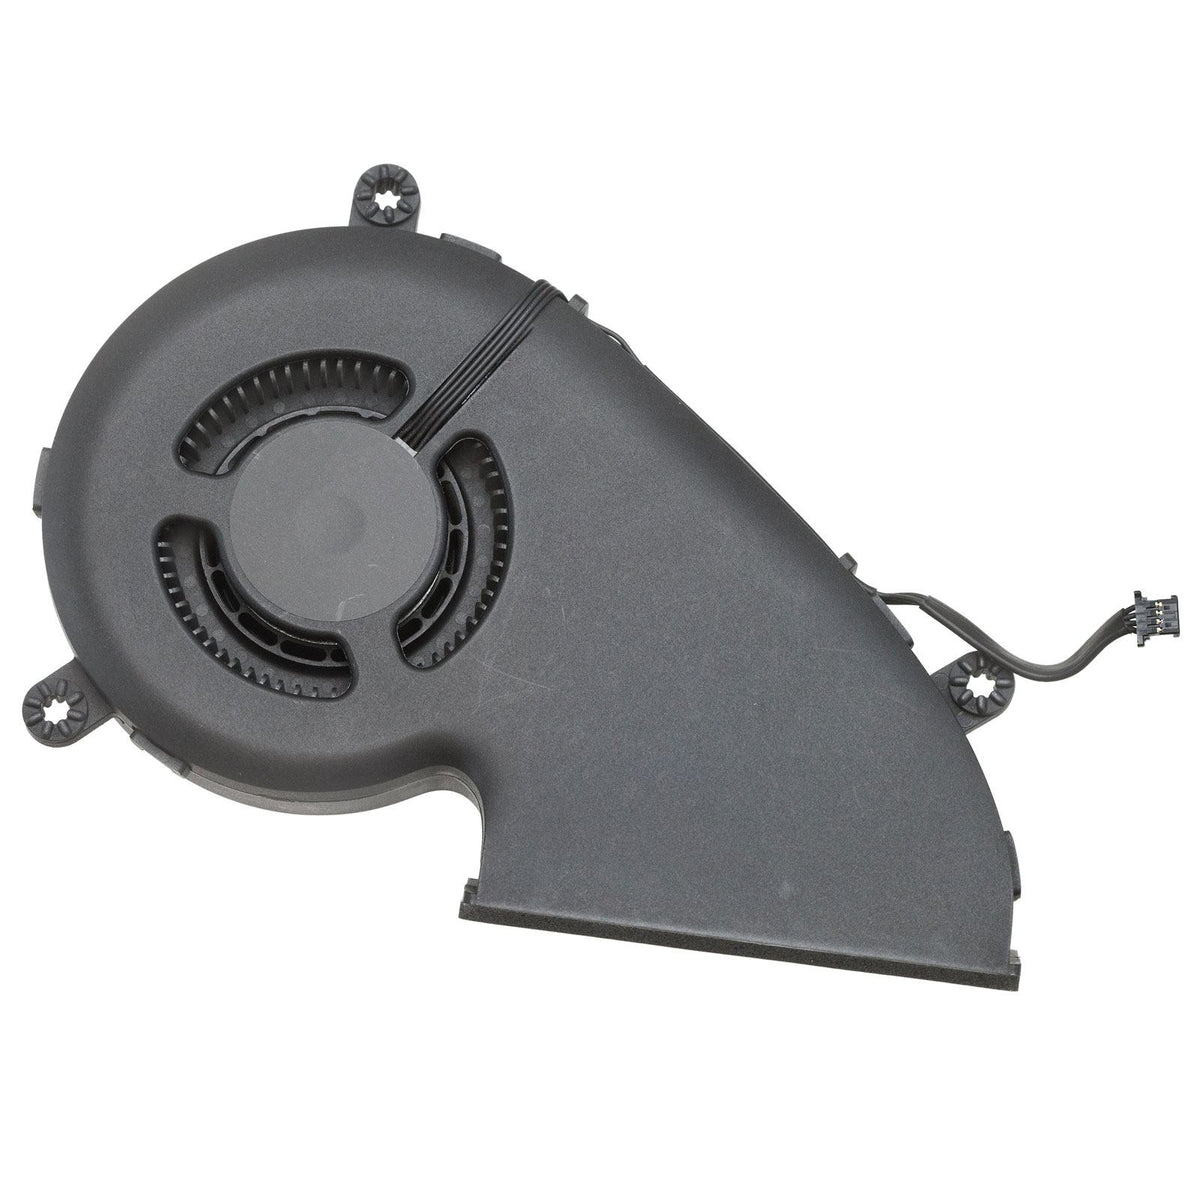 CPU FAN FOR IMAC 21.5" A1418 (LATE 2012, MID 2014)